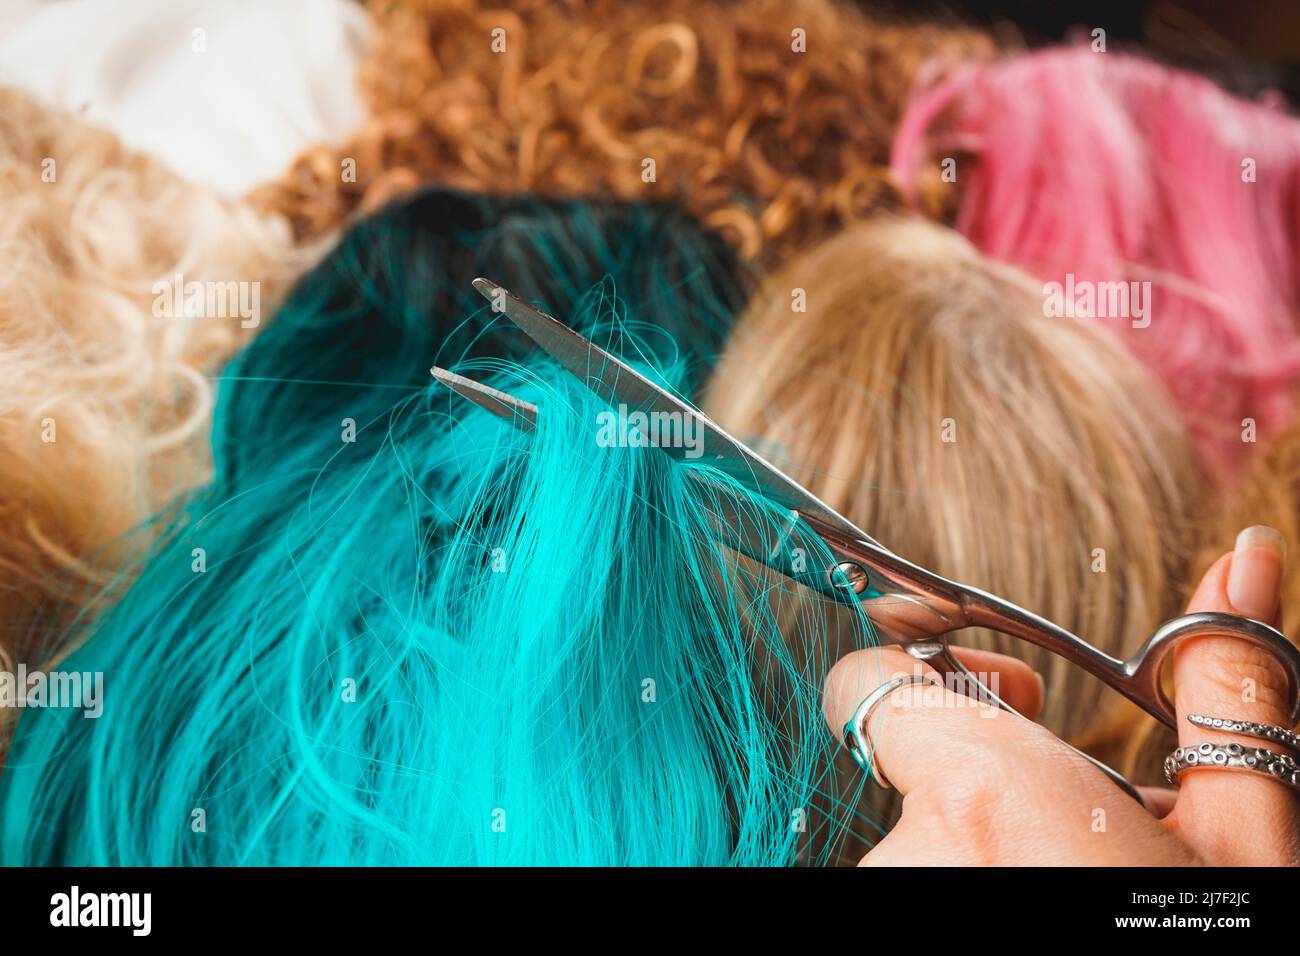 Cloose up of a hairdresser or a cosplayer cutting a blue wig to stylize it with a lot of different wigs as background Stock Photo